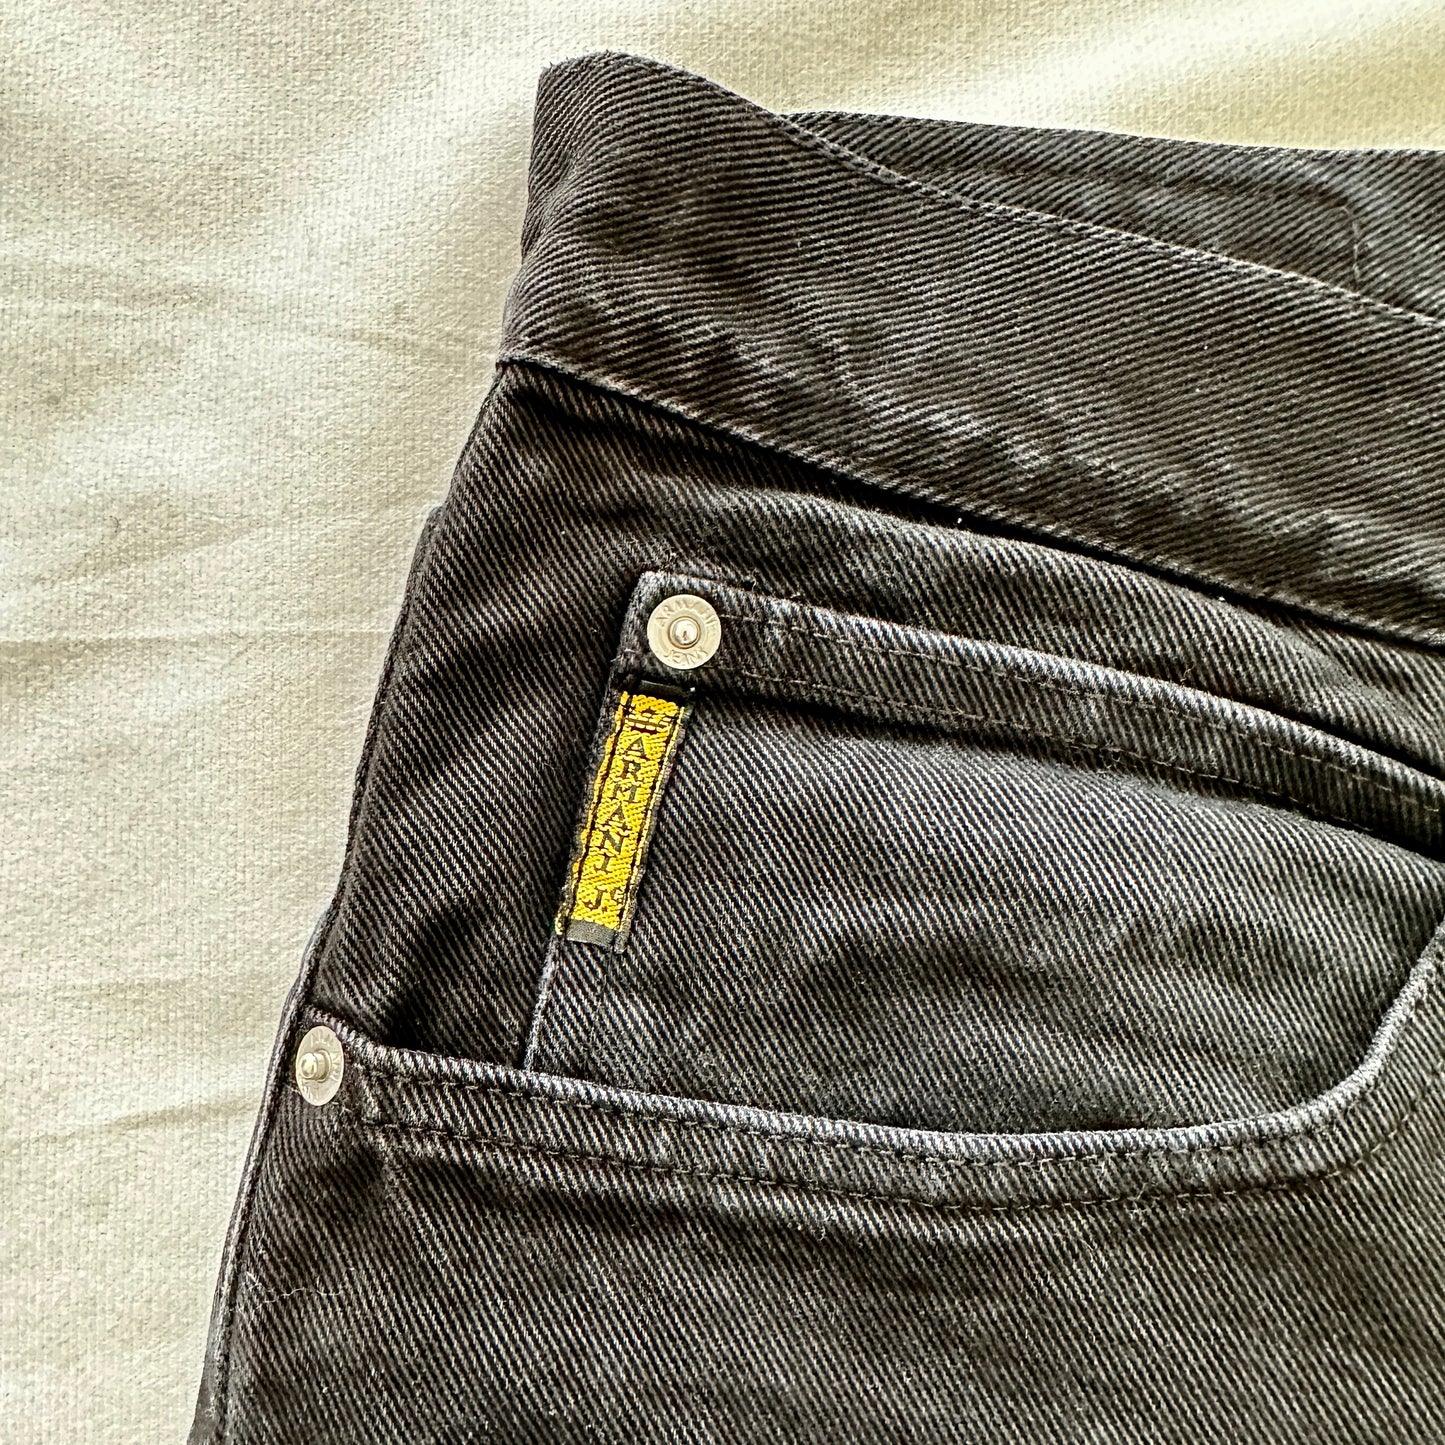 Armani Jeans Vintage 80s Pants - 36 - Made in Italy